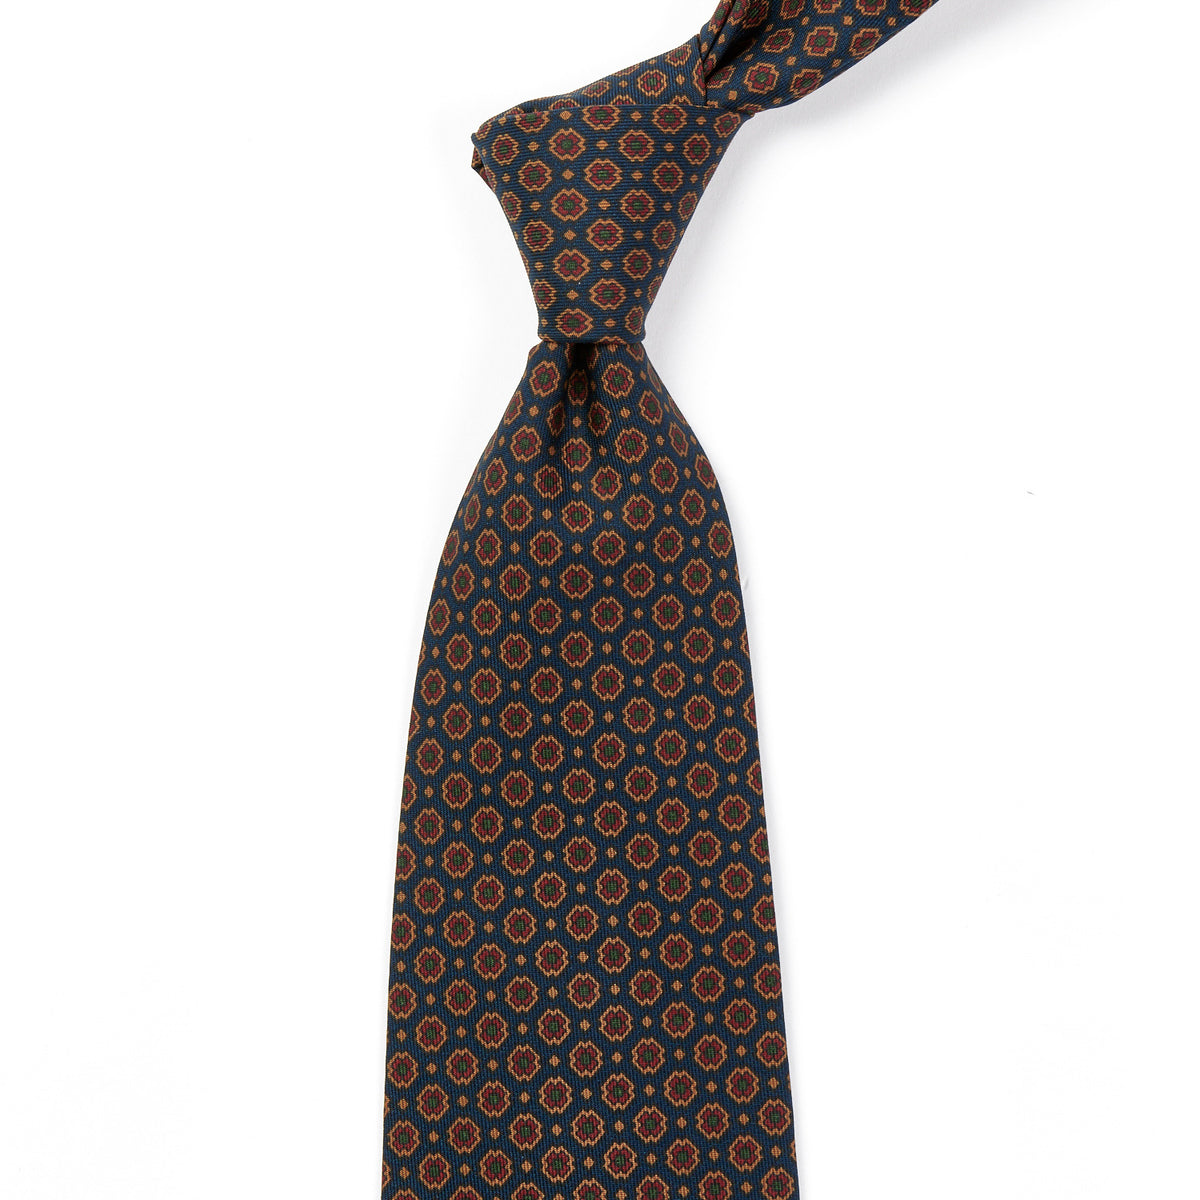 A high-quality Sovereign Grade Dark Navy Small Floral Ancient Madder Tie, handmade in the United Kingdom and available on KirbyAllison.com.